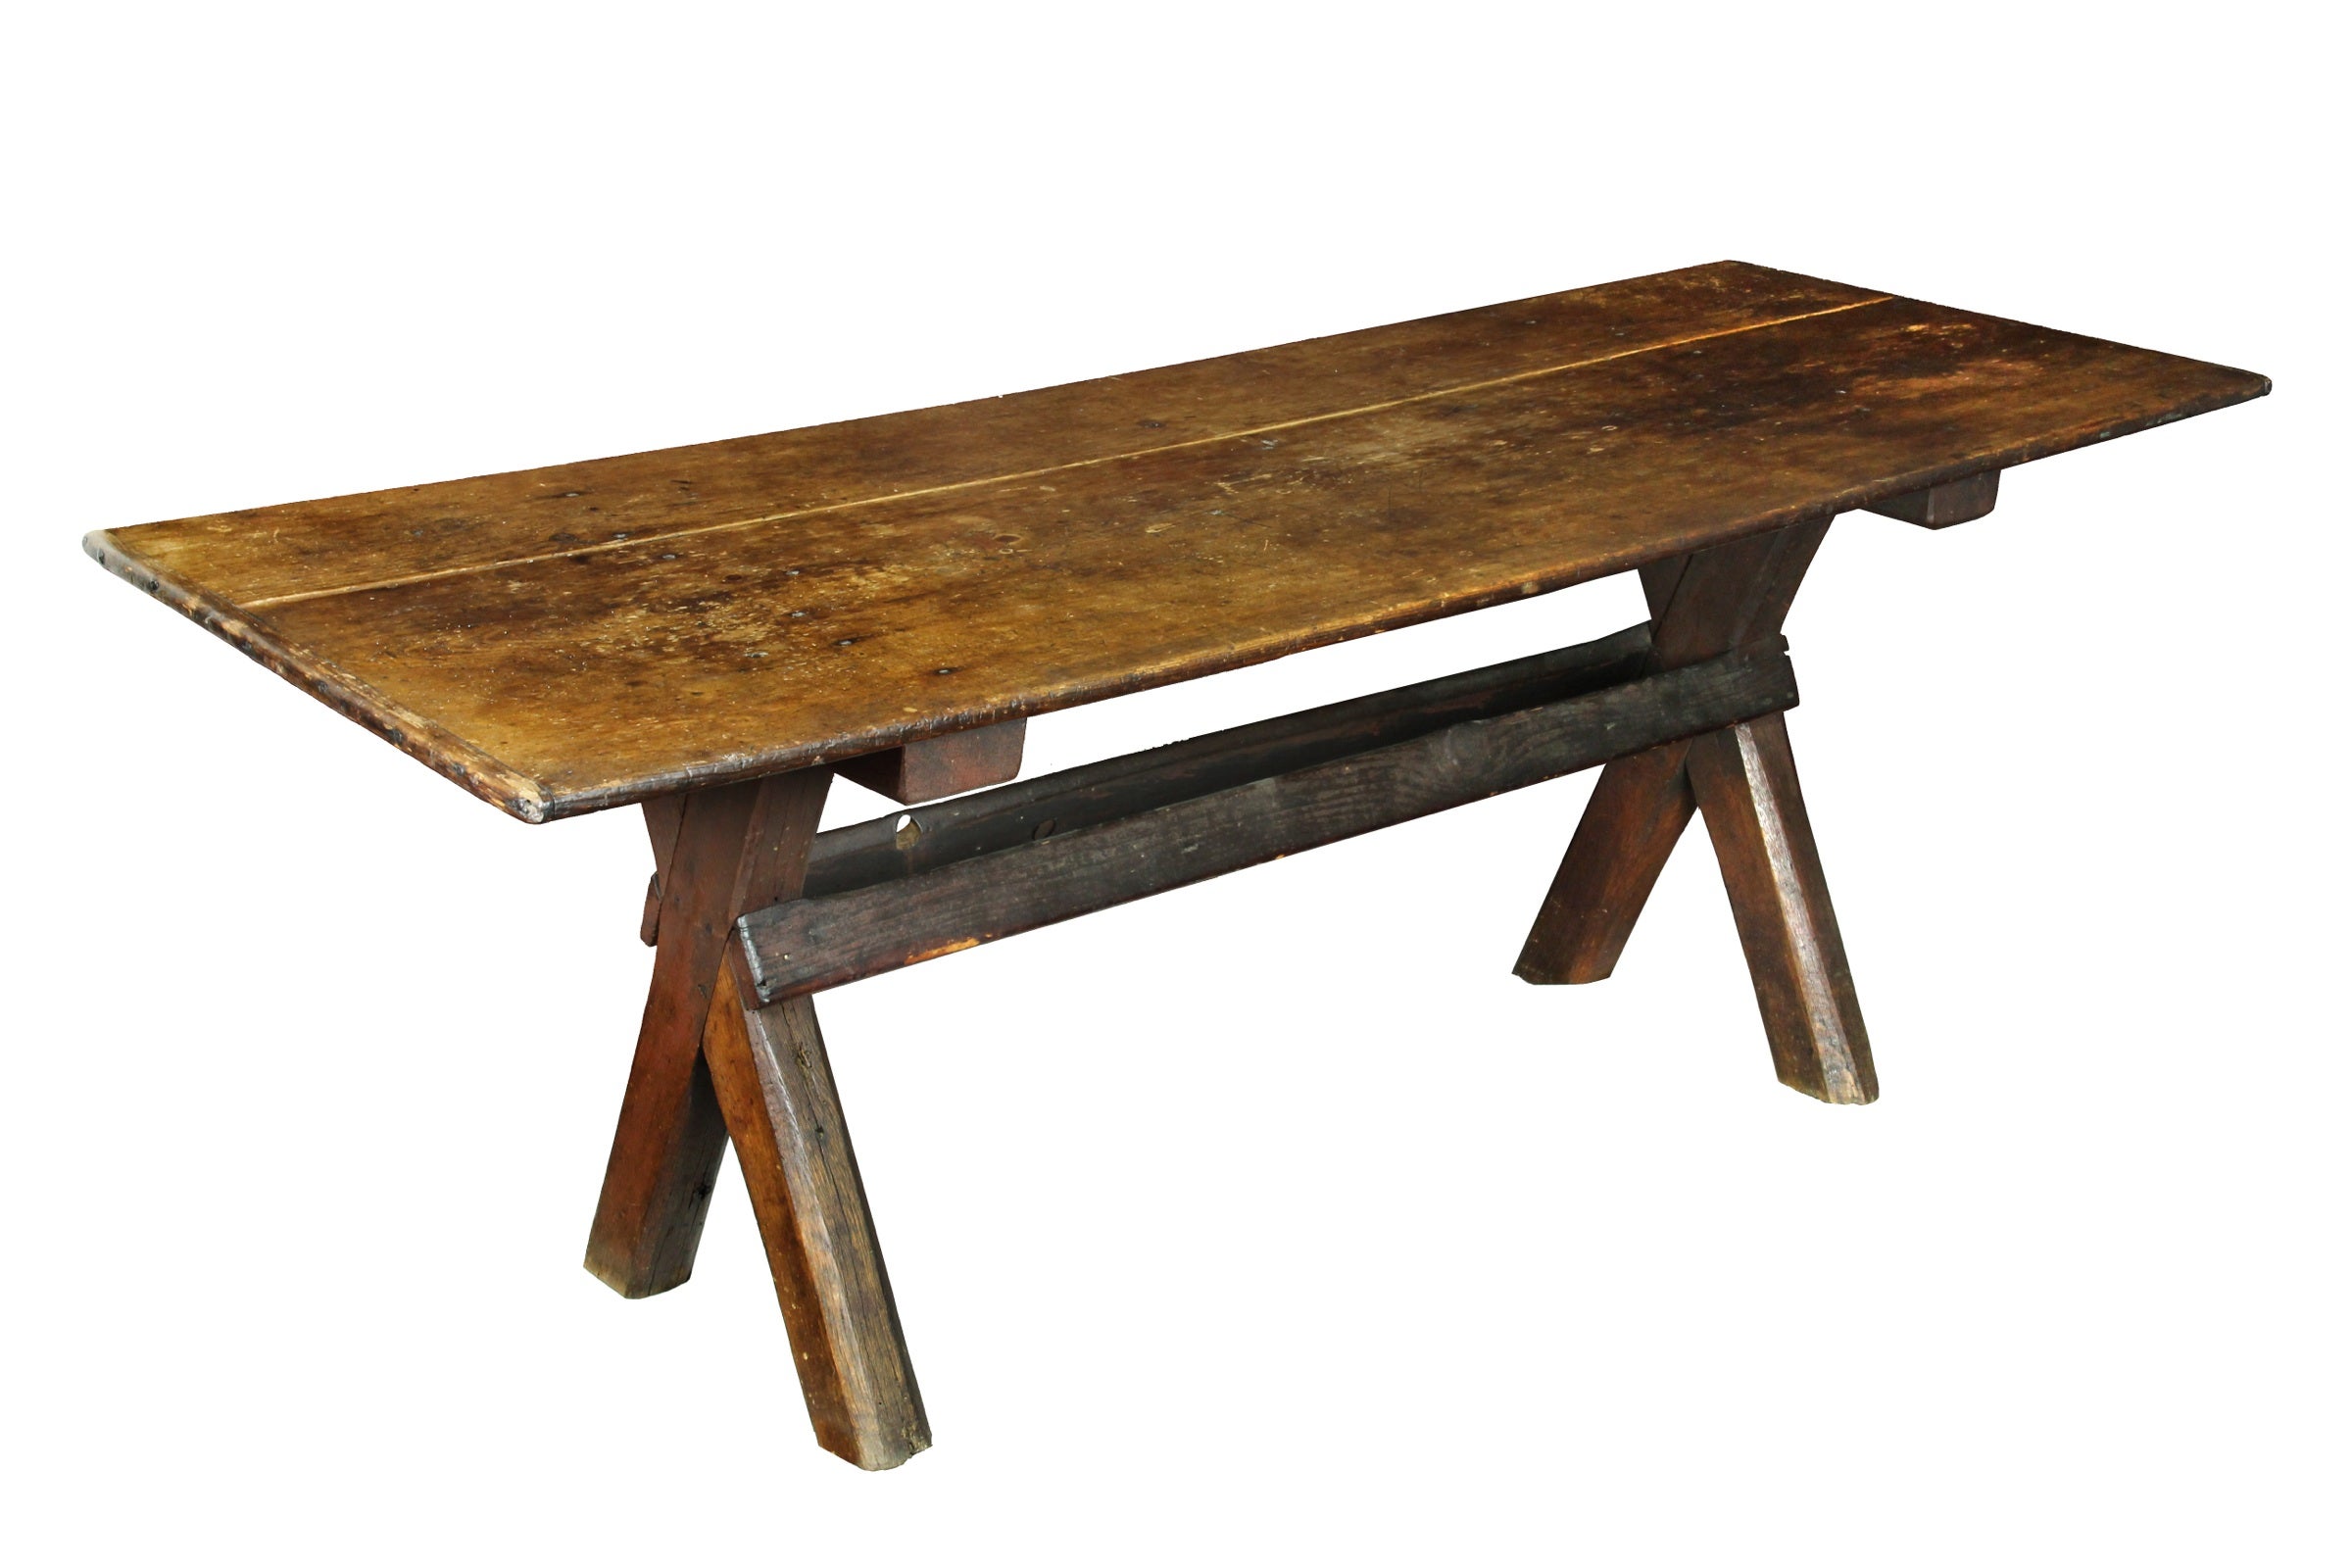 Rare Sawbuck Dining Table of Chestnut and Pine circa Early 18th Century